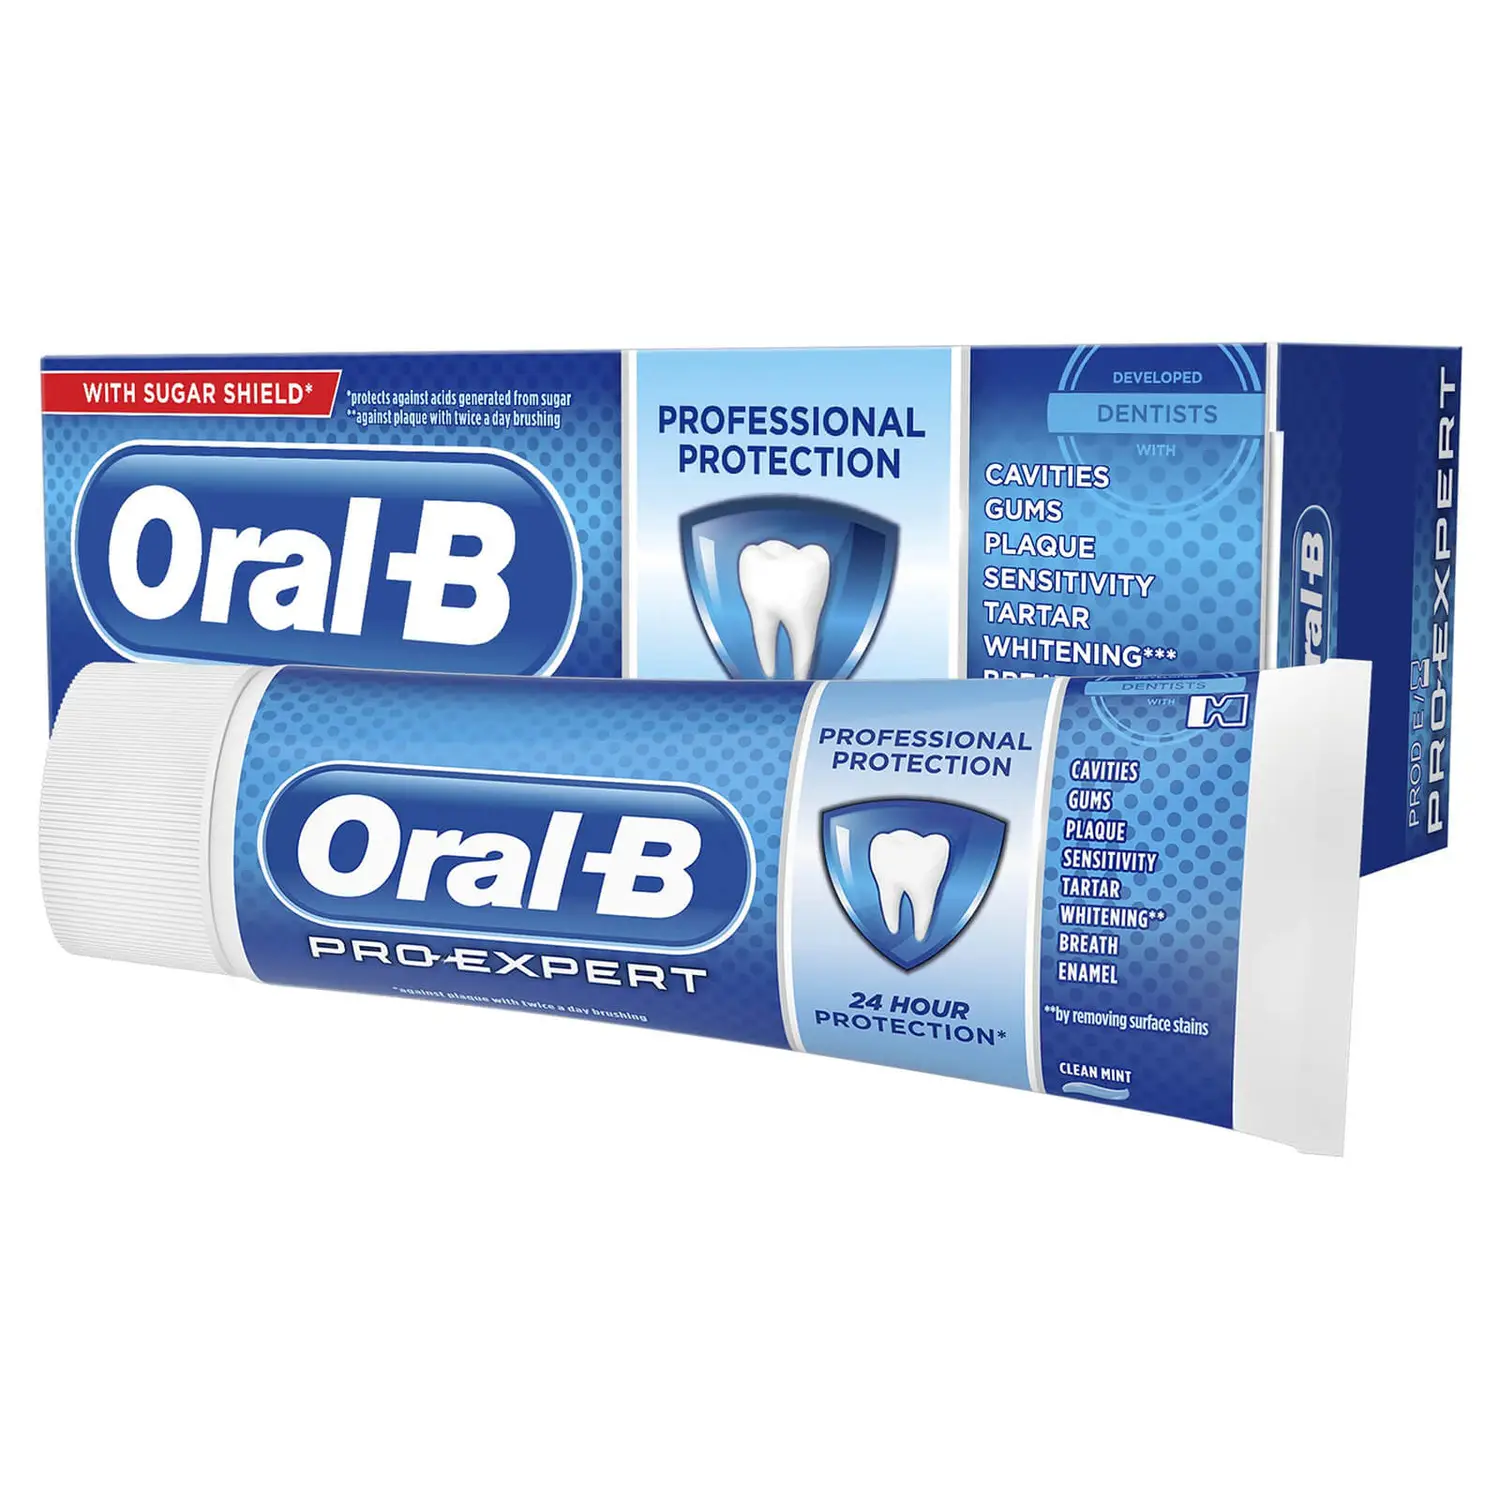 Oral-B 75ml Pro Expert Toothpaste